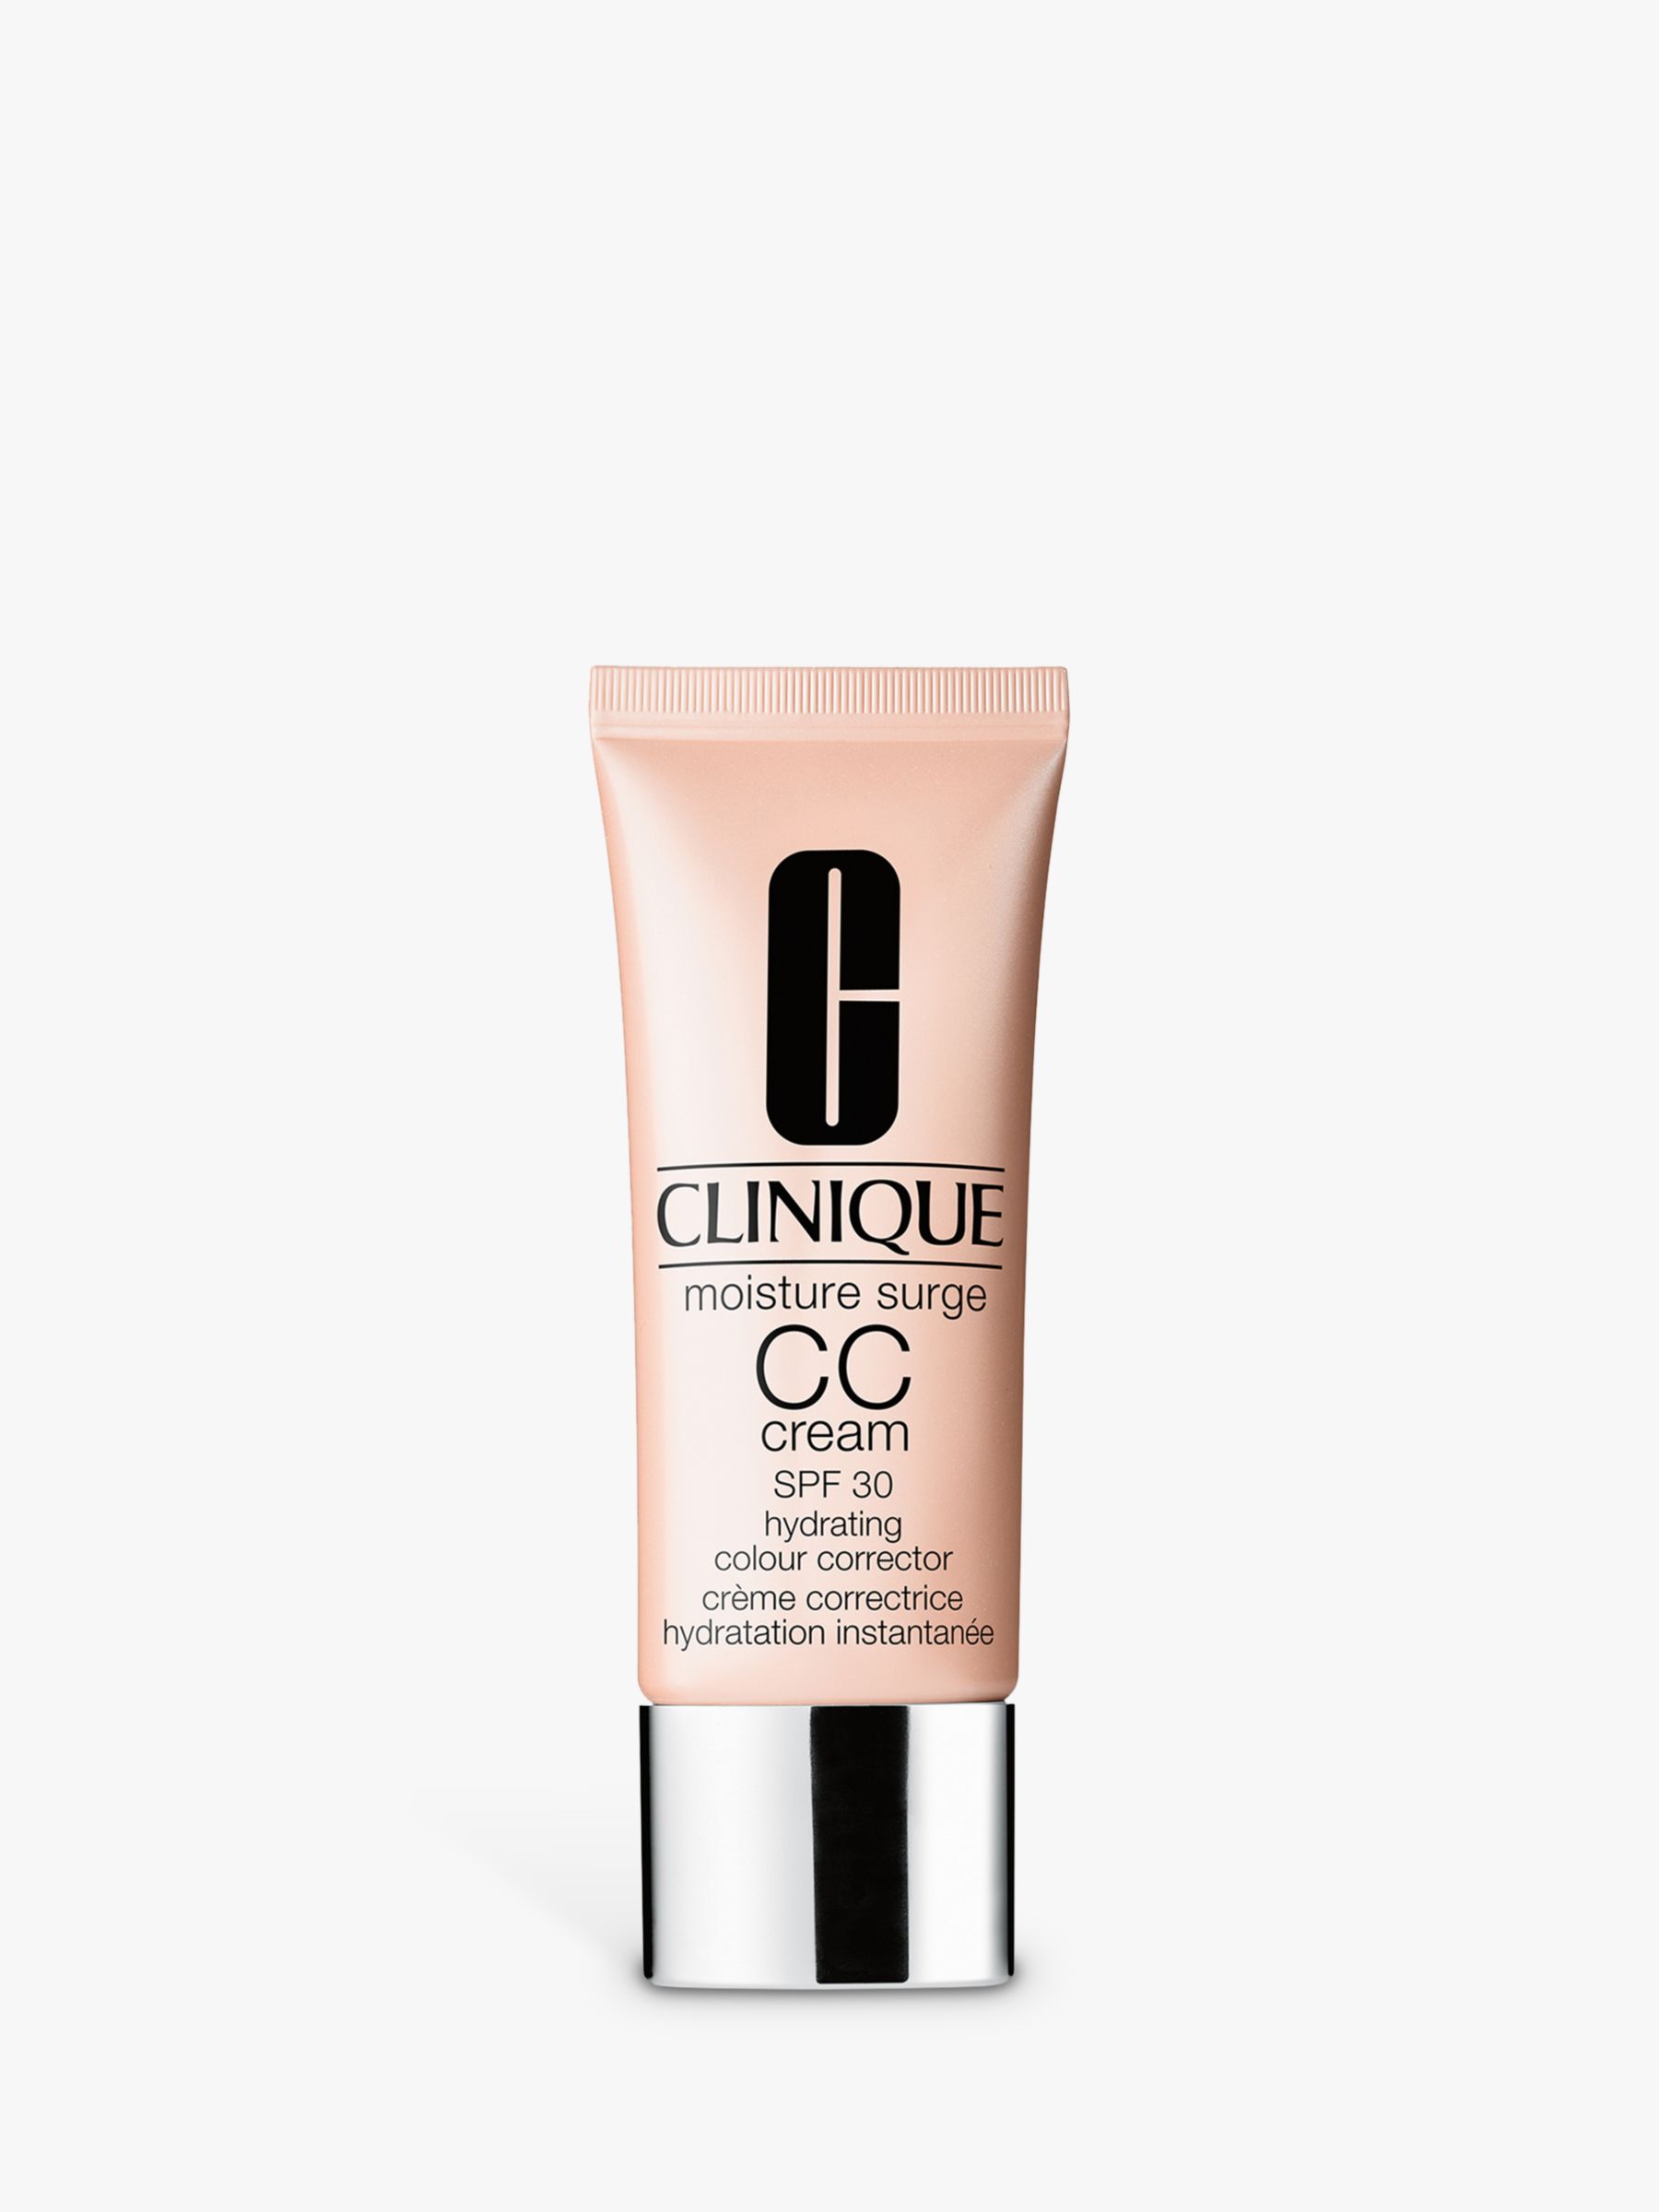 CHANEL CC Cream Super Active Complete Correction SPF 50, B20 at John Lewis  & Partners